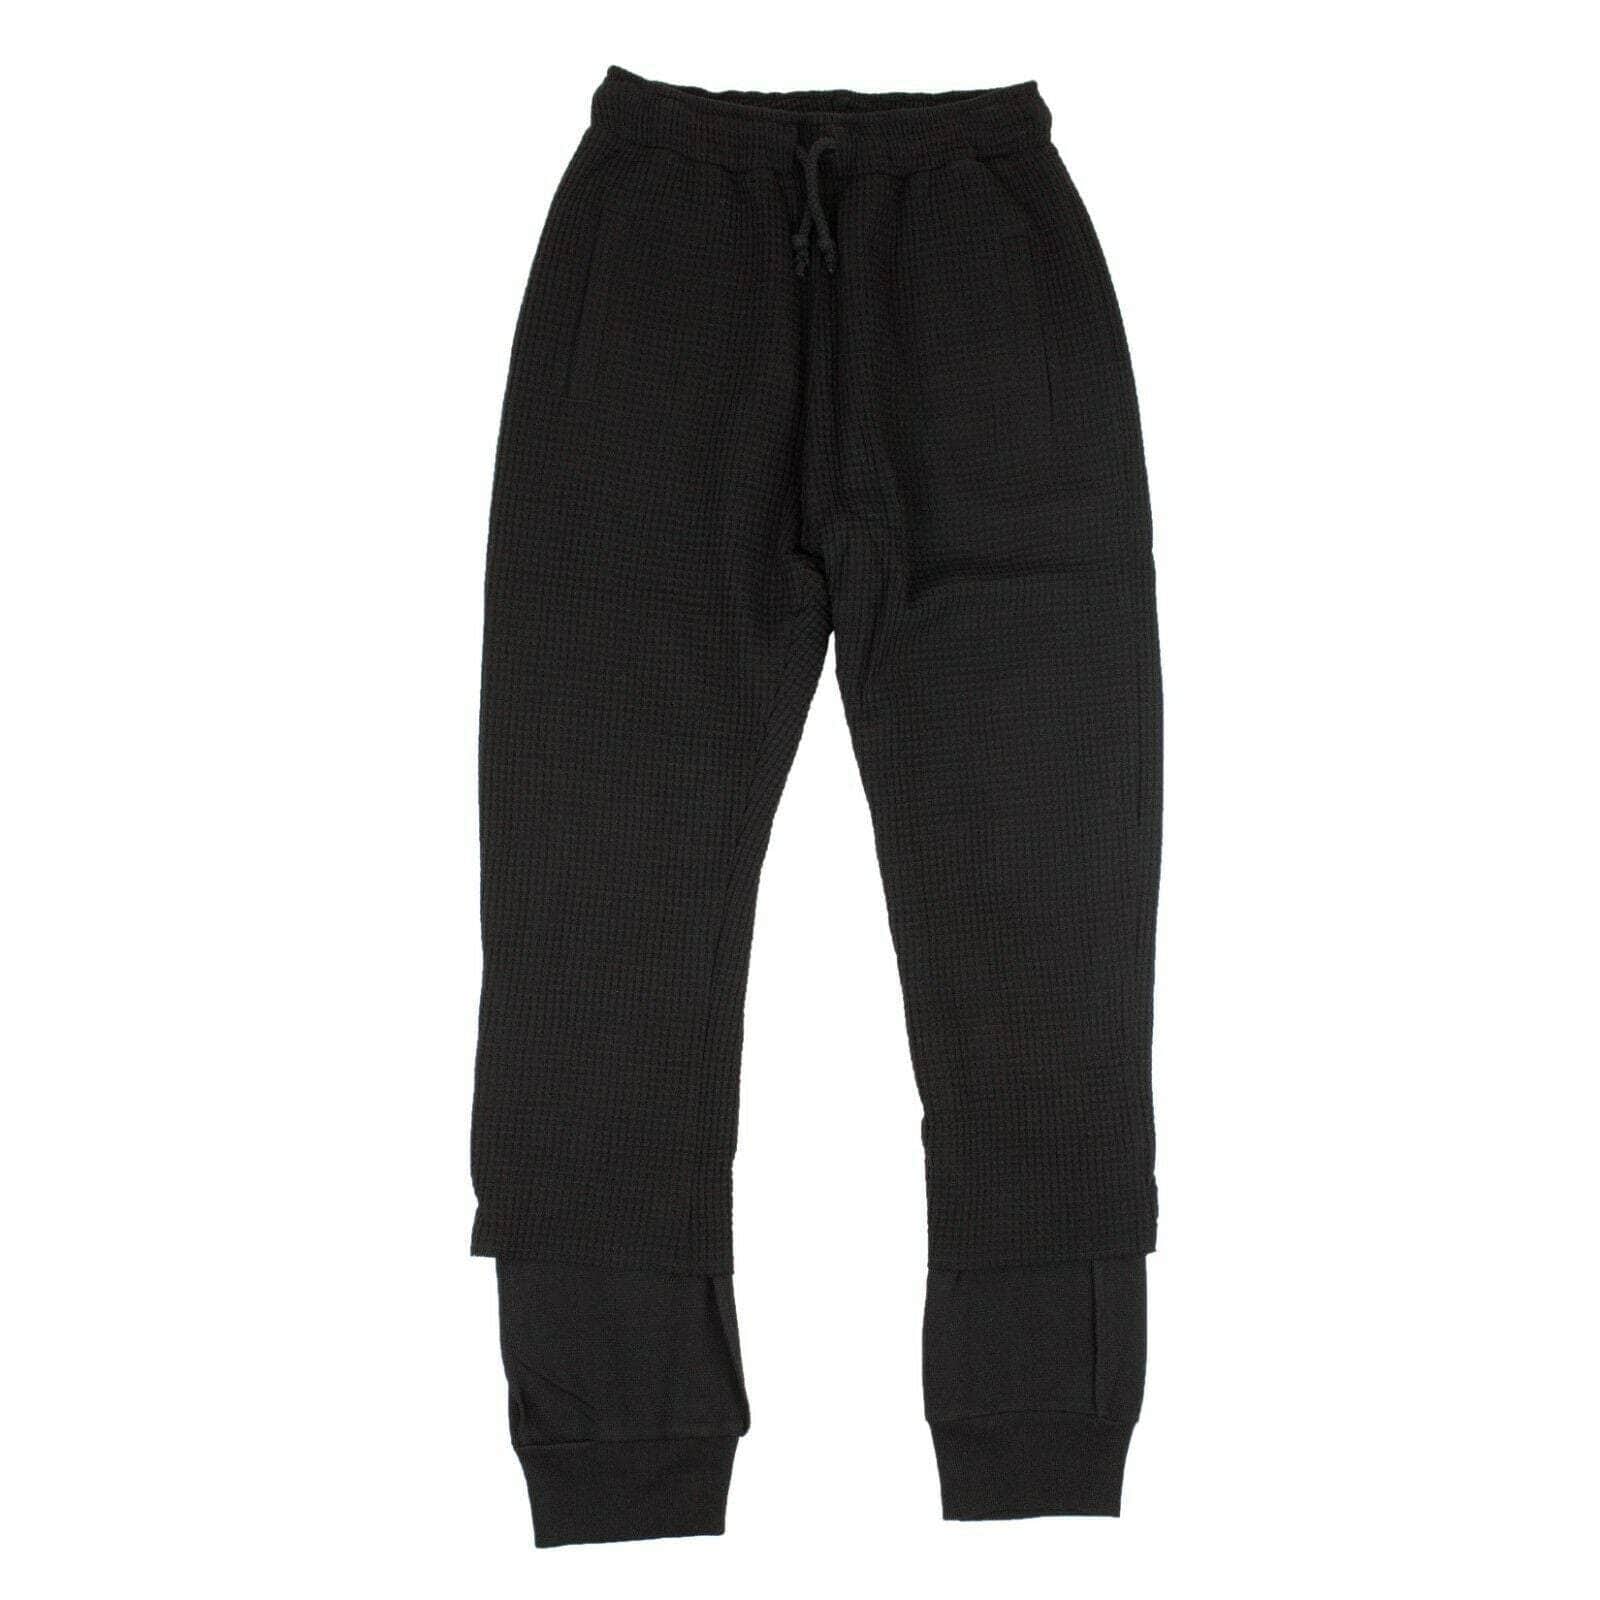 424 ON FAIRFAX 424-on-fairfax, channelenable-all, chicmi, couponcollection, gender-mens, main-clothing, mens-joggers-sweatpants, size-xs, under-250 XS Black Waffle Ribbed Sweatpants 87AB-424-1062/XS 87AB-424-1062/XS